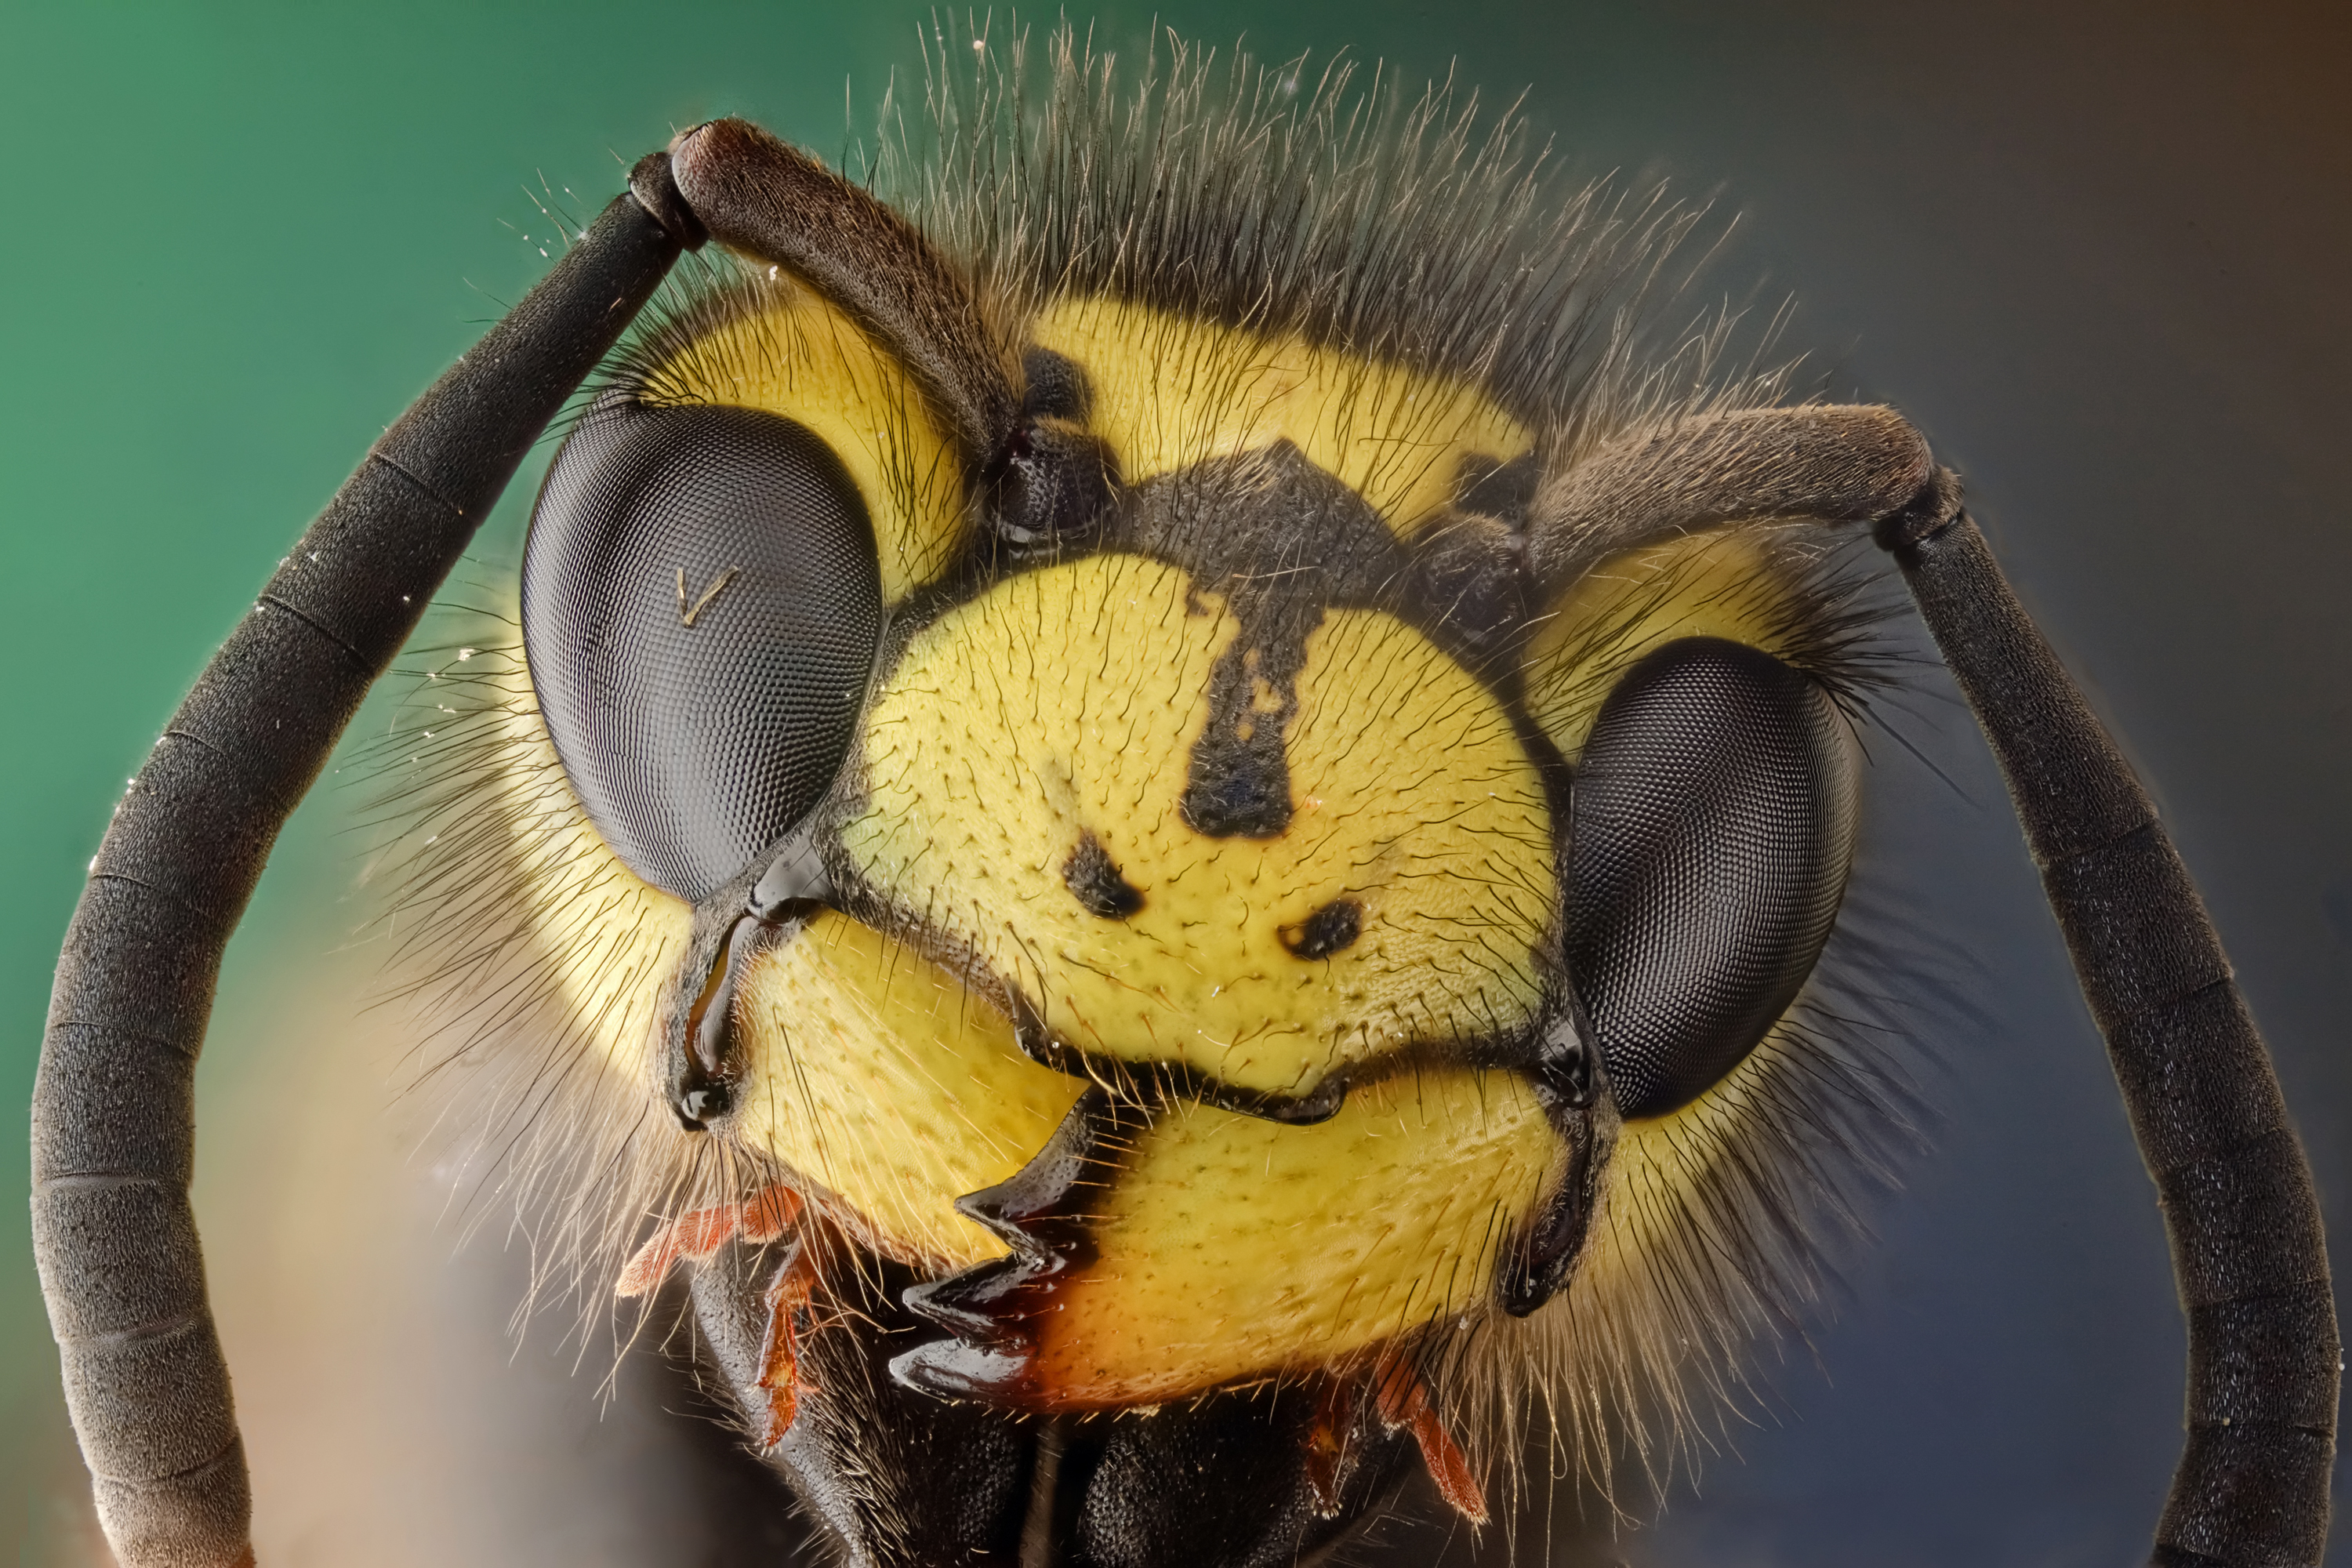 animals, insects, hornets, bees - desktop wallpaper